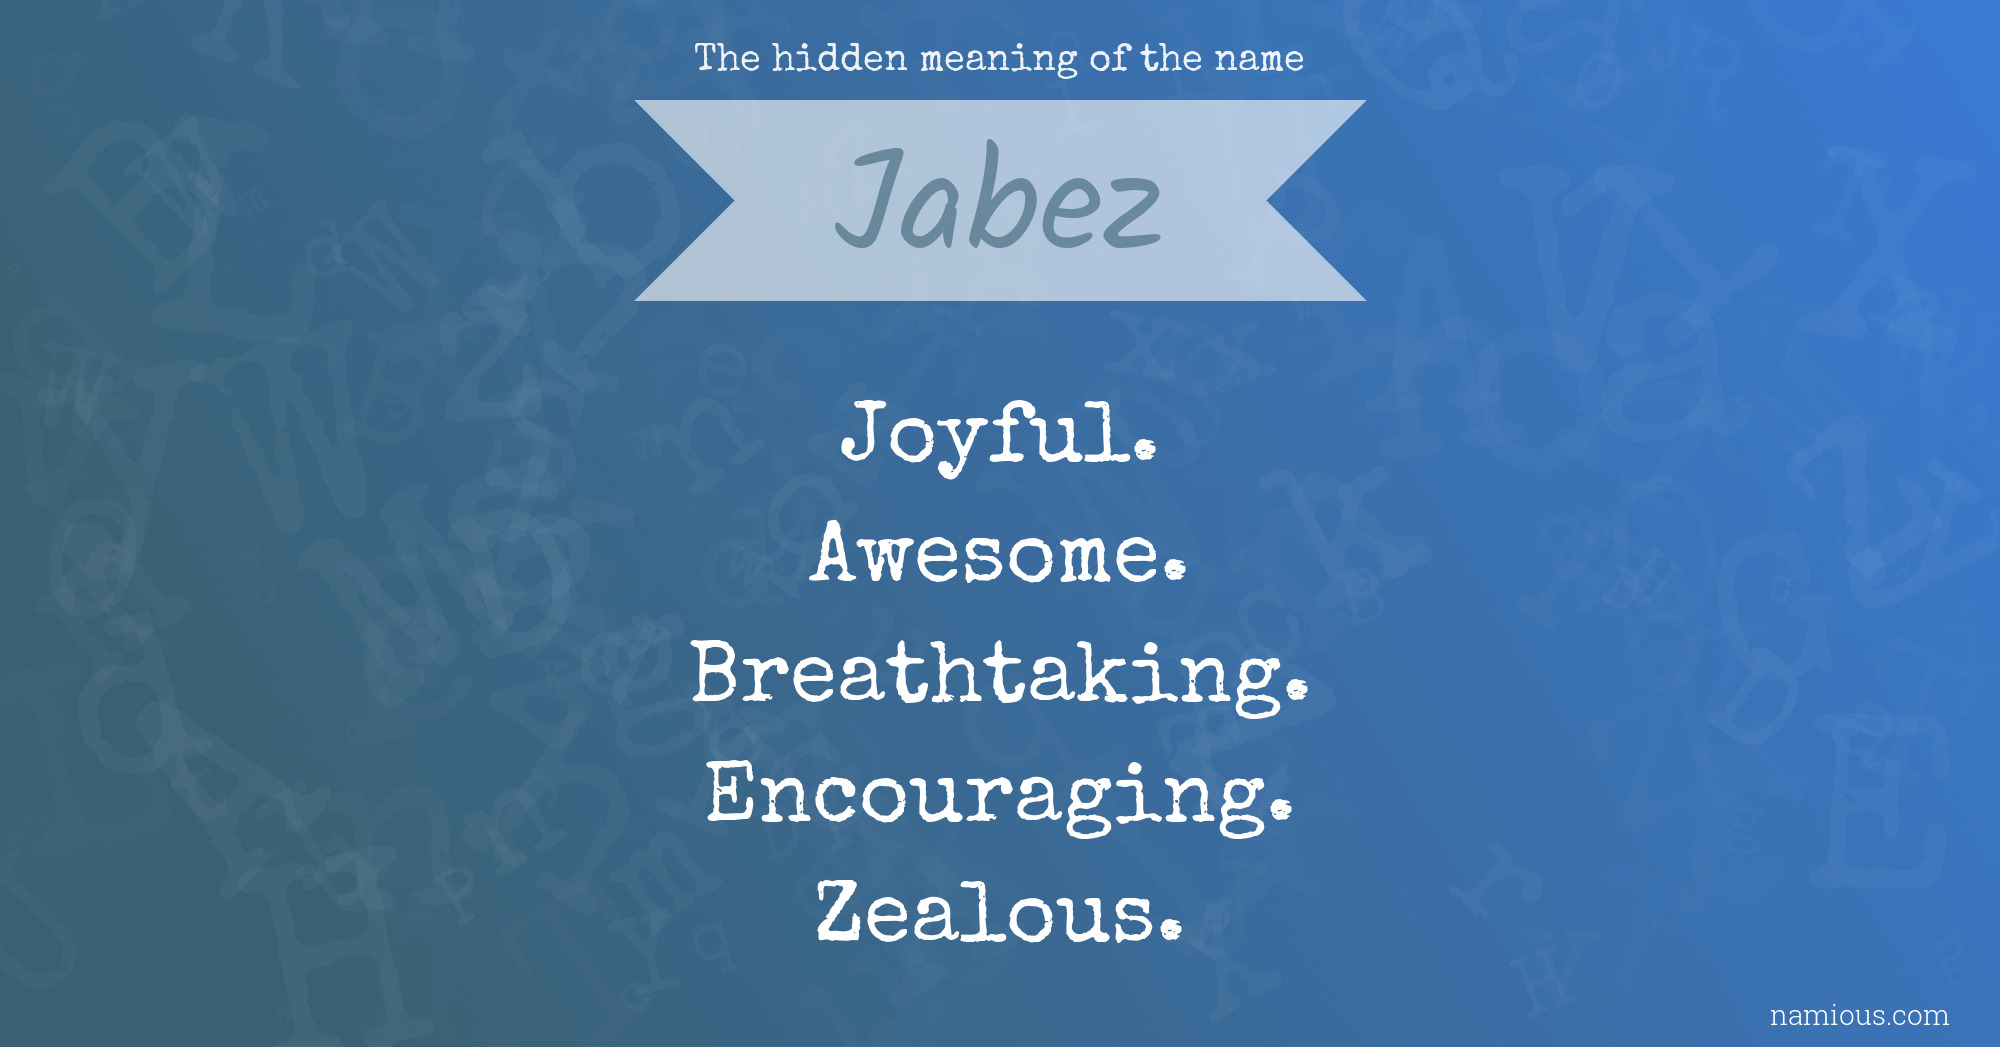 The hidden meaning of the name Jabez